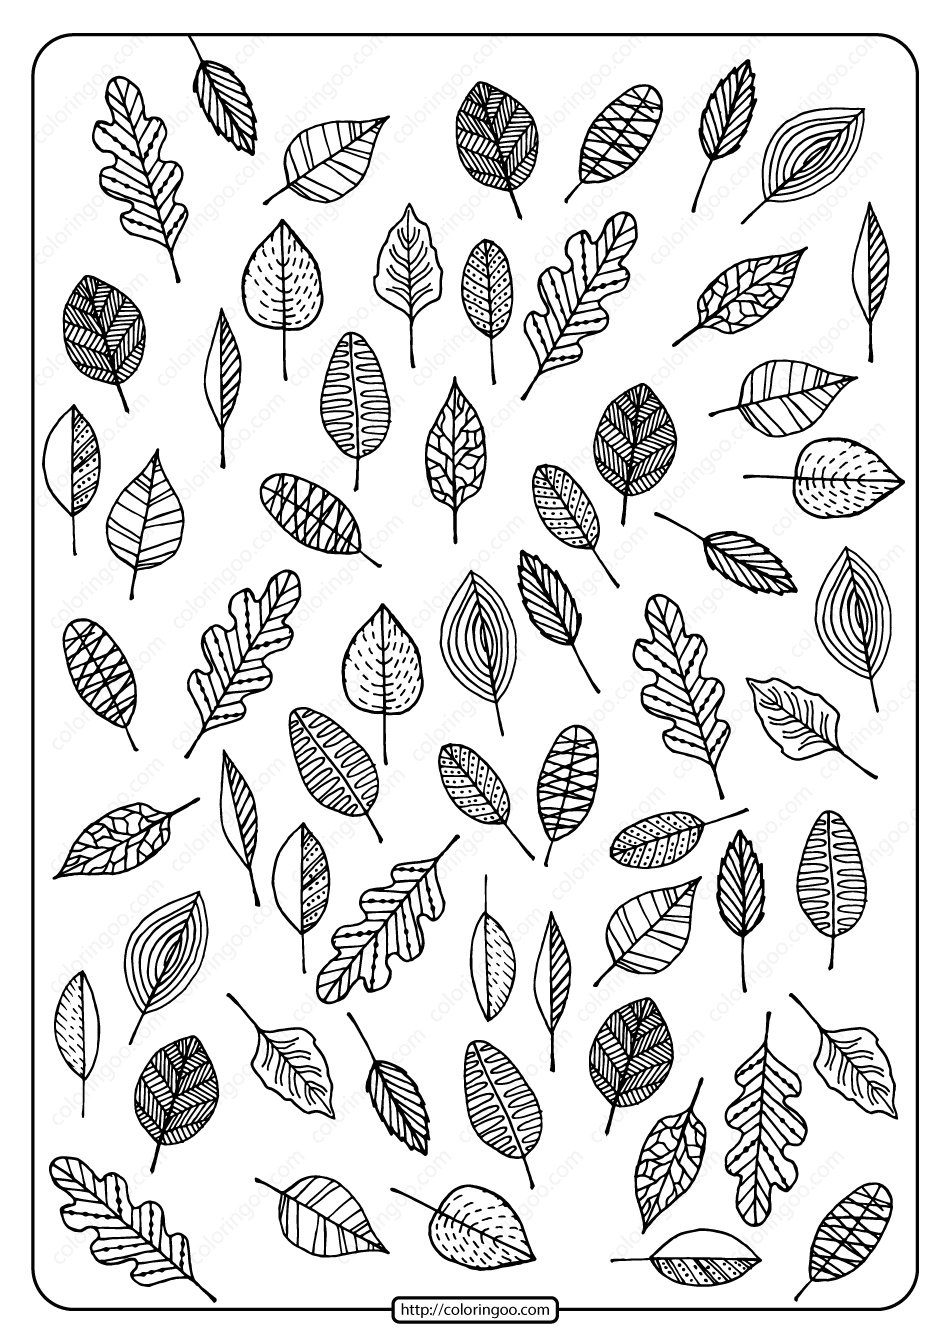 printable autumn leaves coloring page